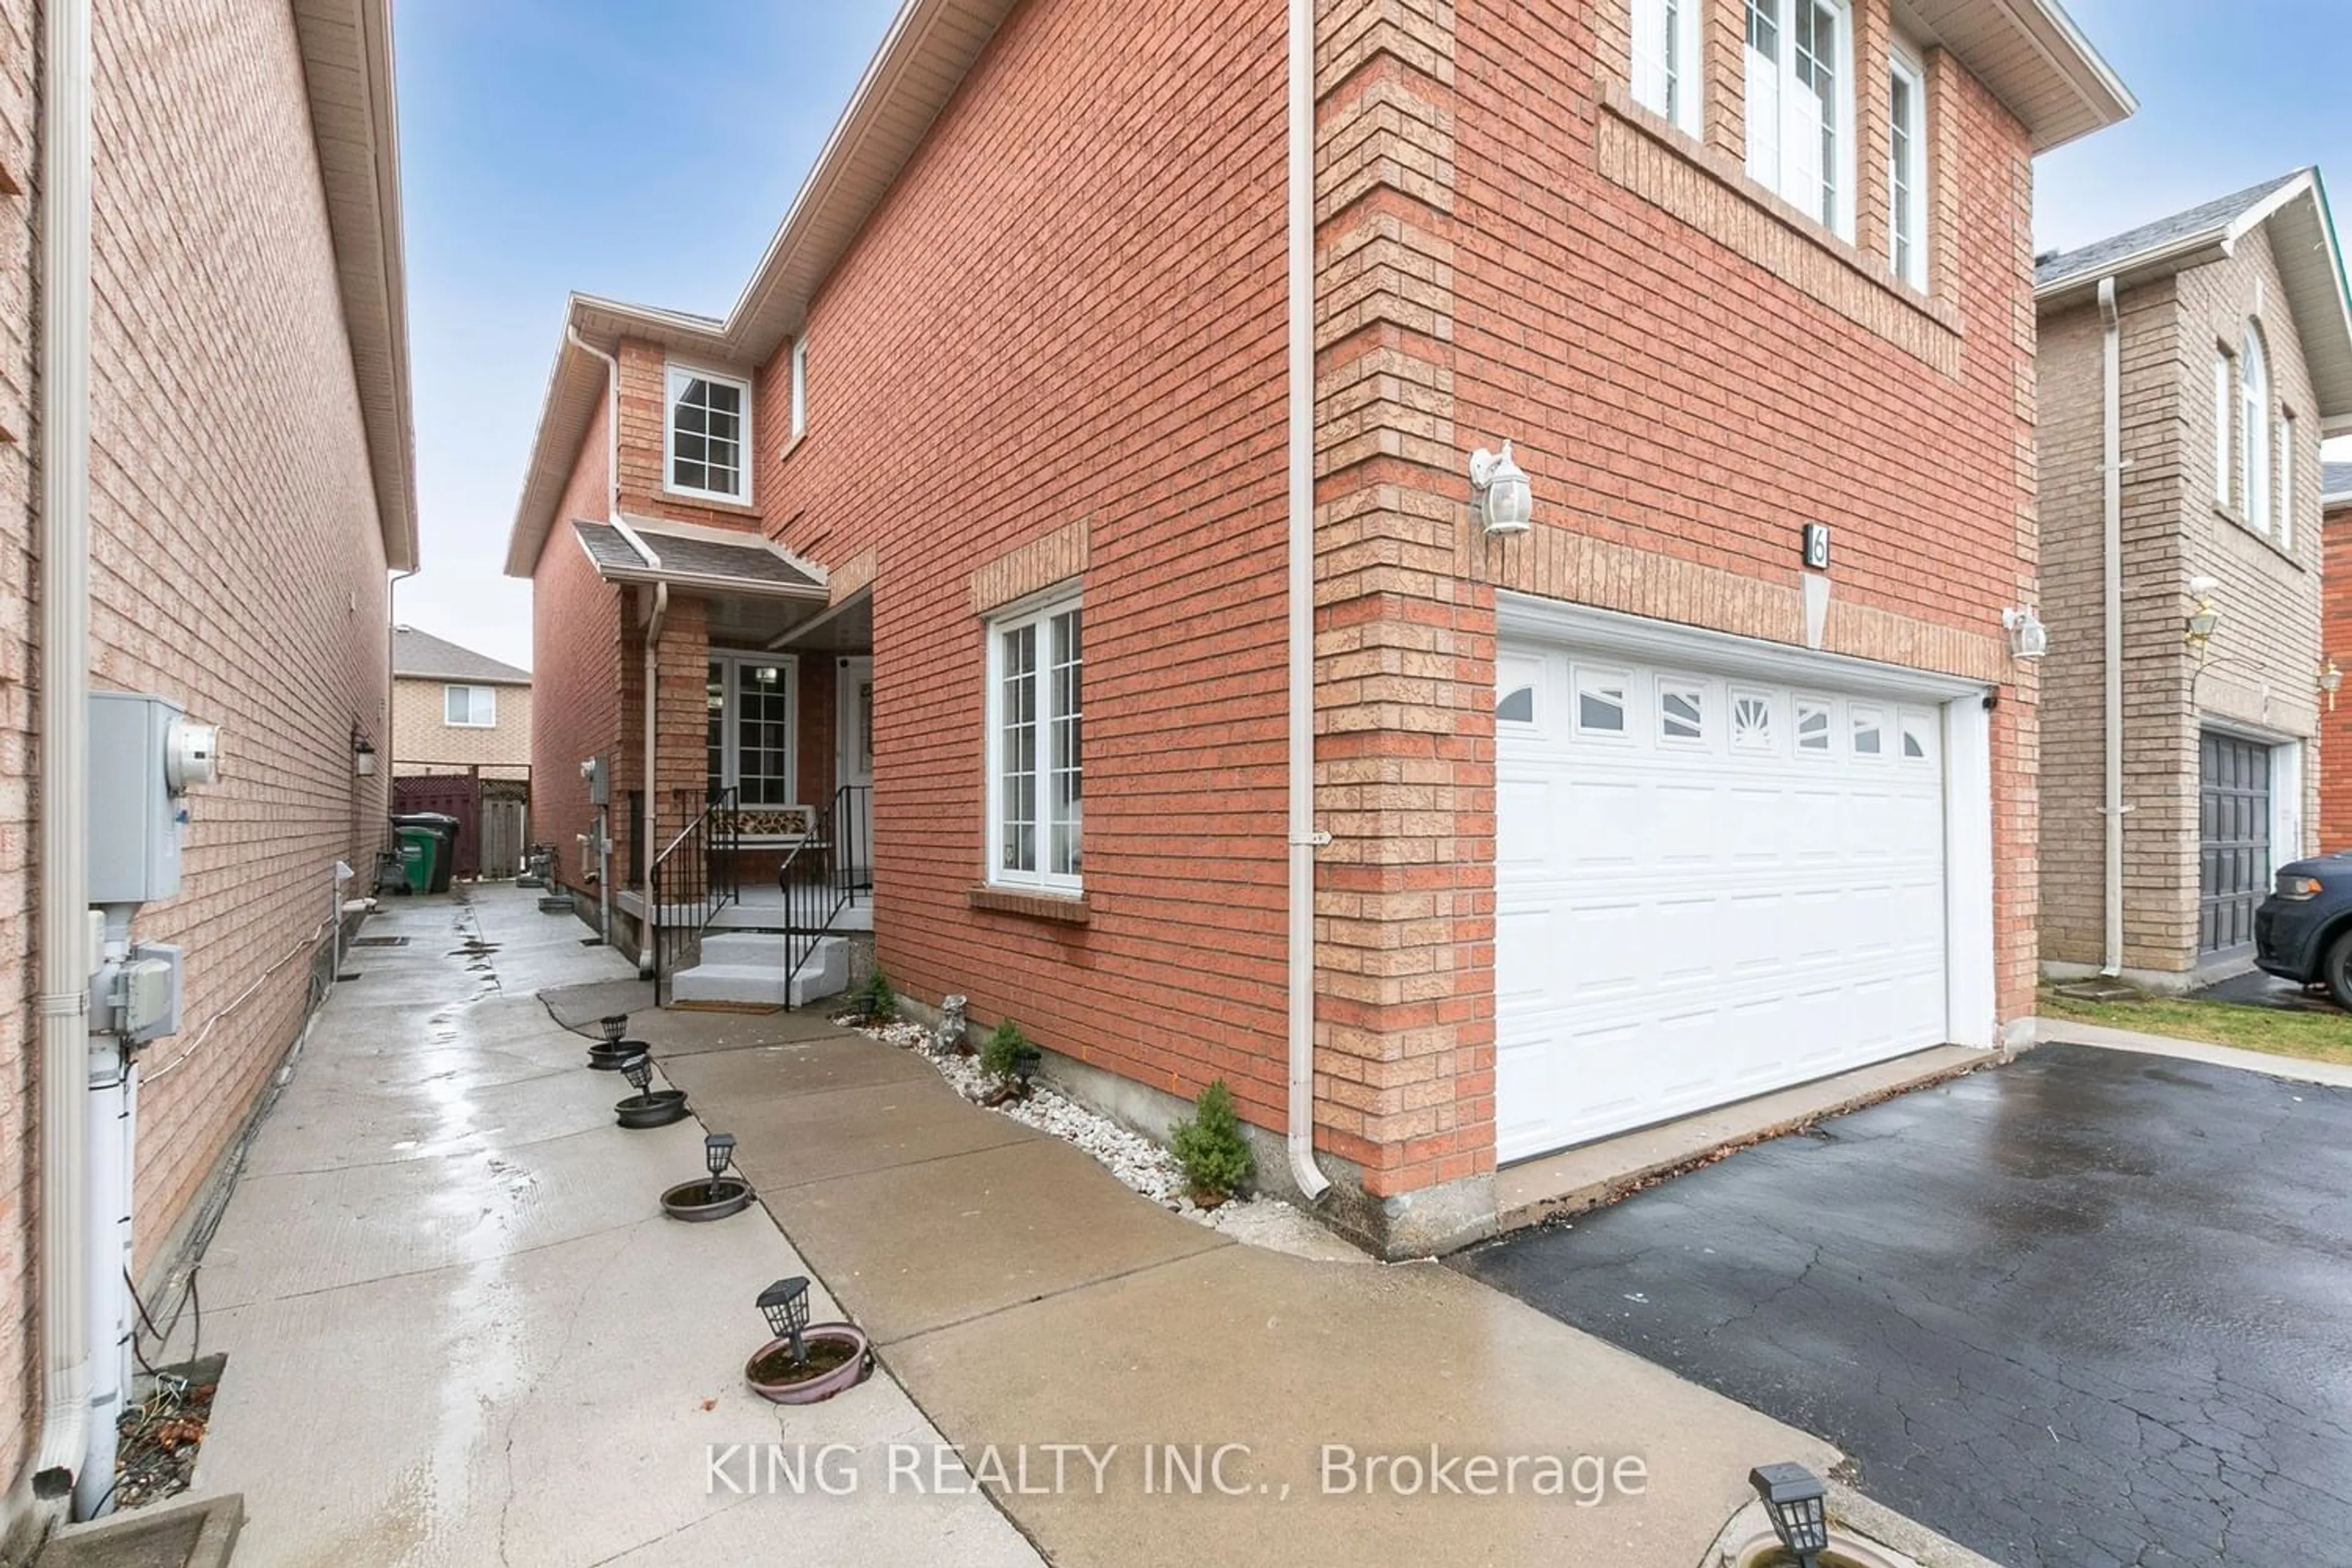 Home with brick exterior material for 6 Rockford Run, Brampton Ontario L6Y 5A5